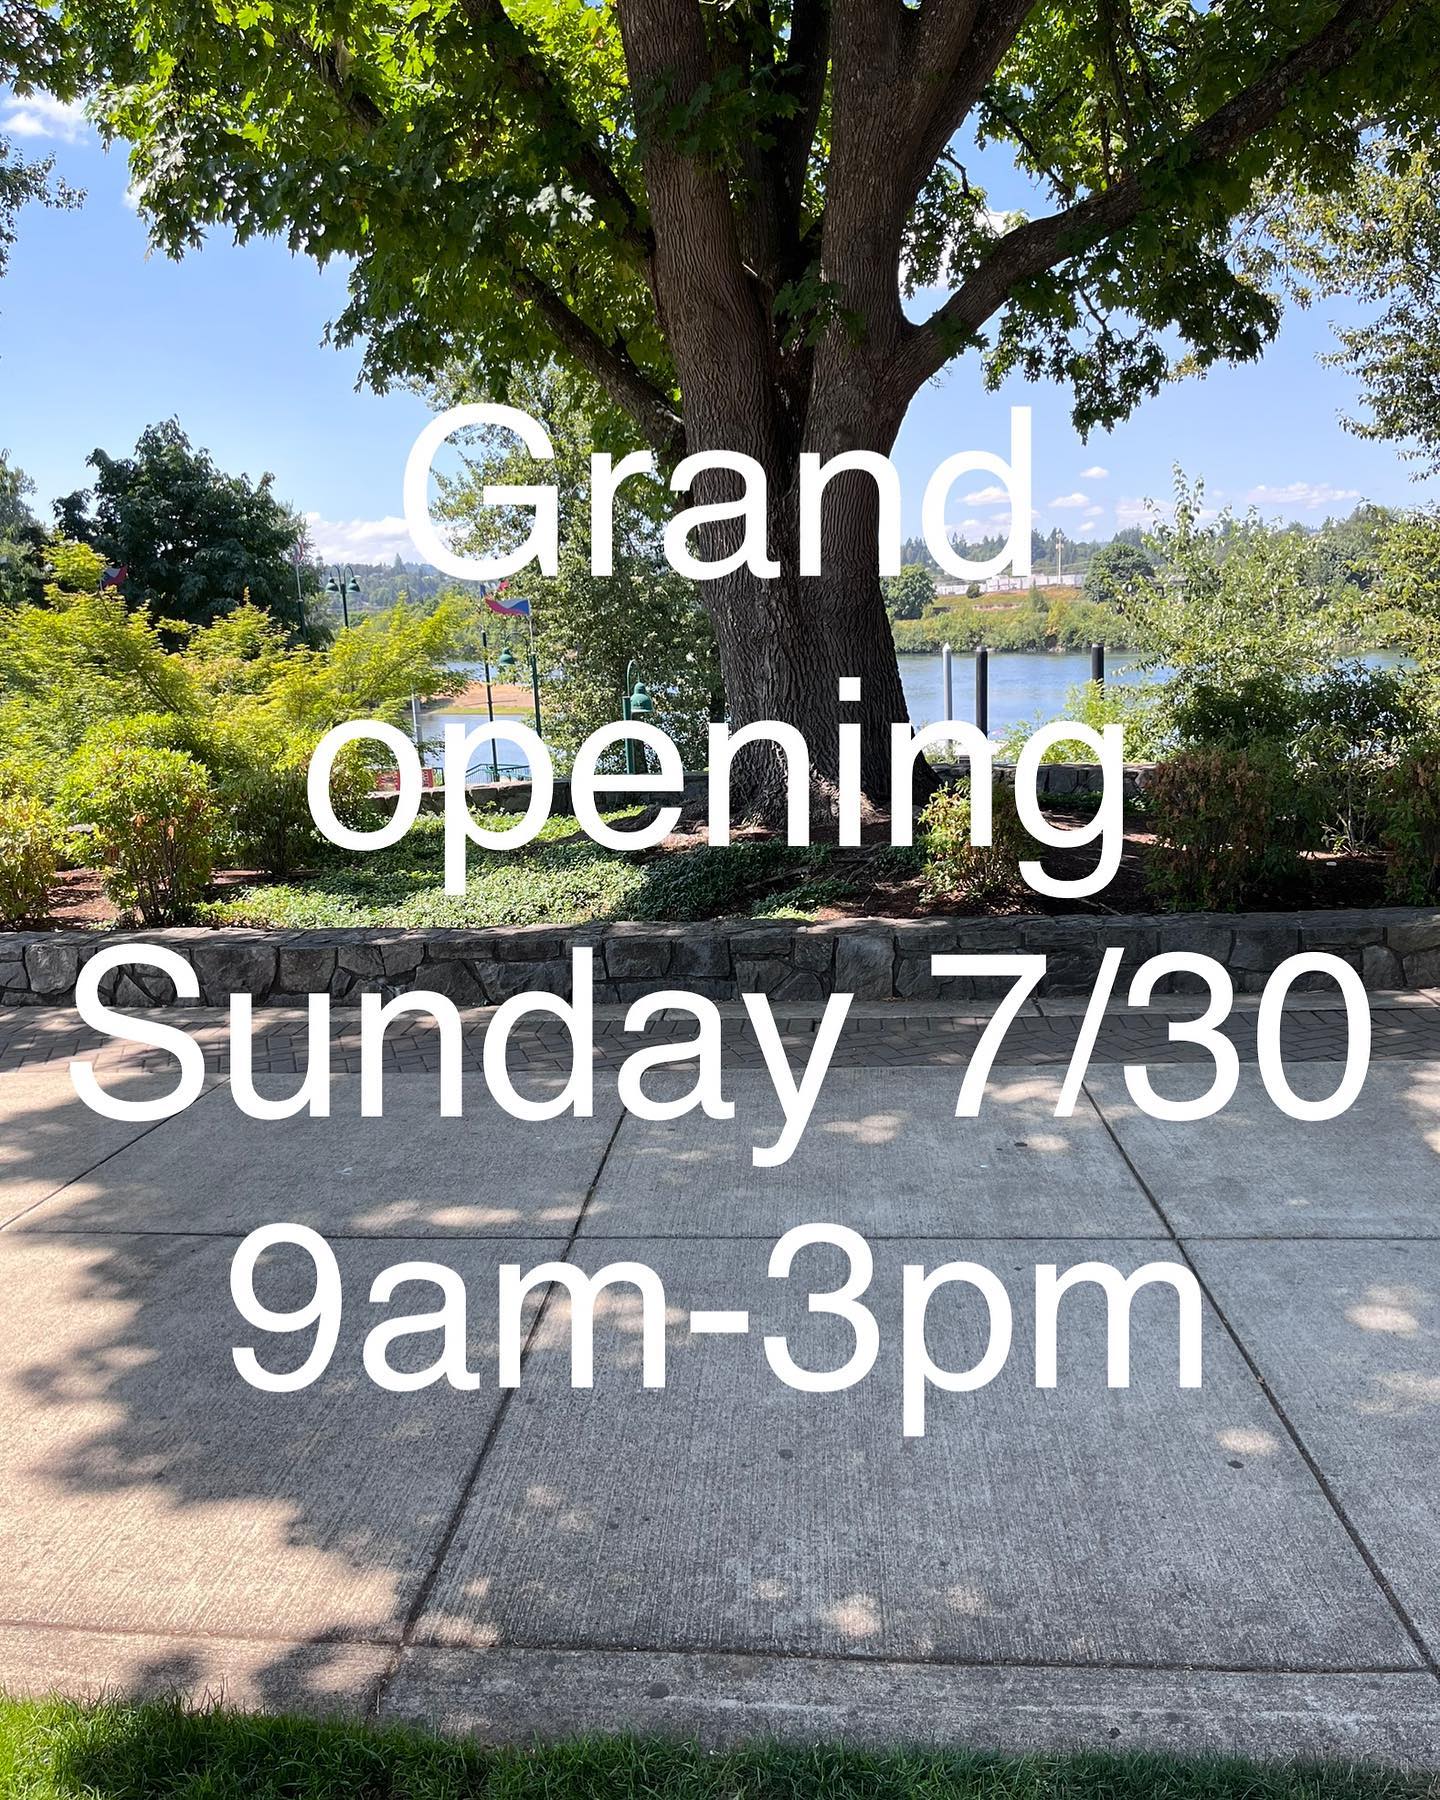 This just in! Our grand opening will be this Sunday 7/30 at 9 am! Find us at Salem Riverfront near the splash pad until 3(unless we run out!) Can’t wait to see everyone and serve you something tasty!